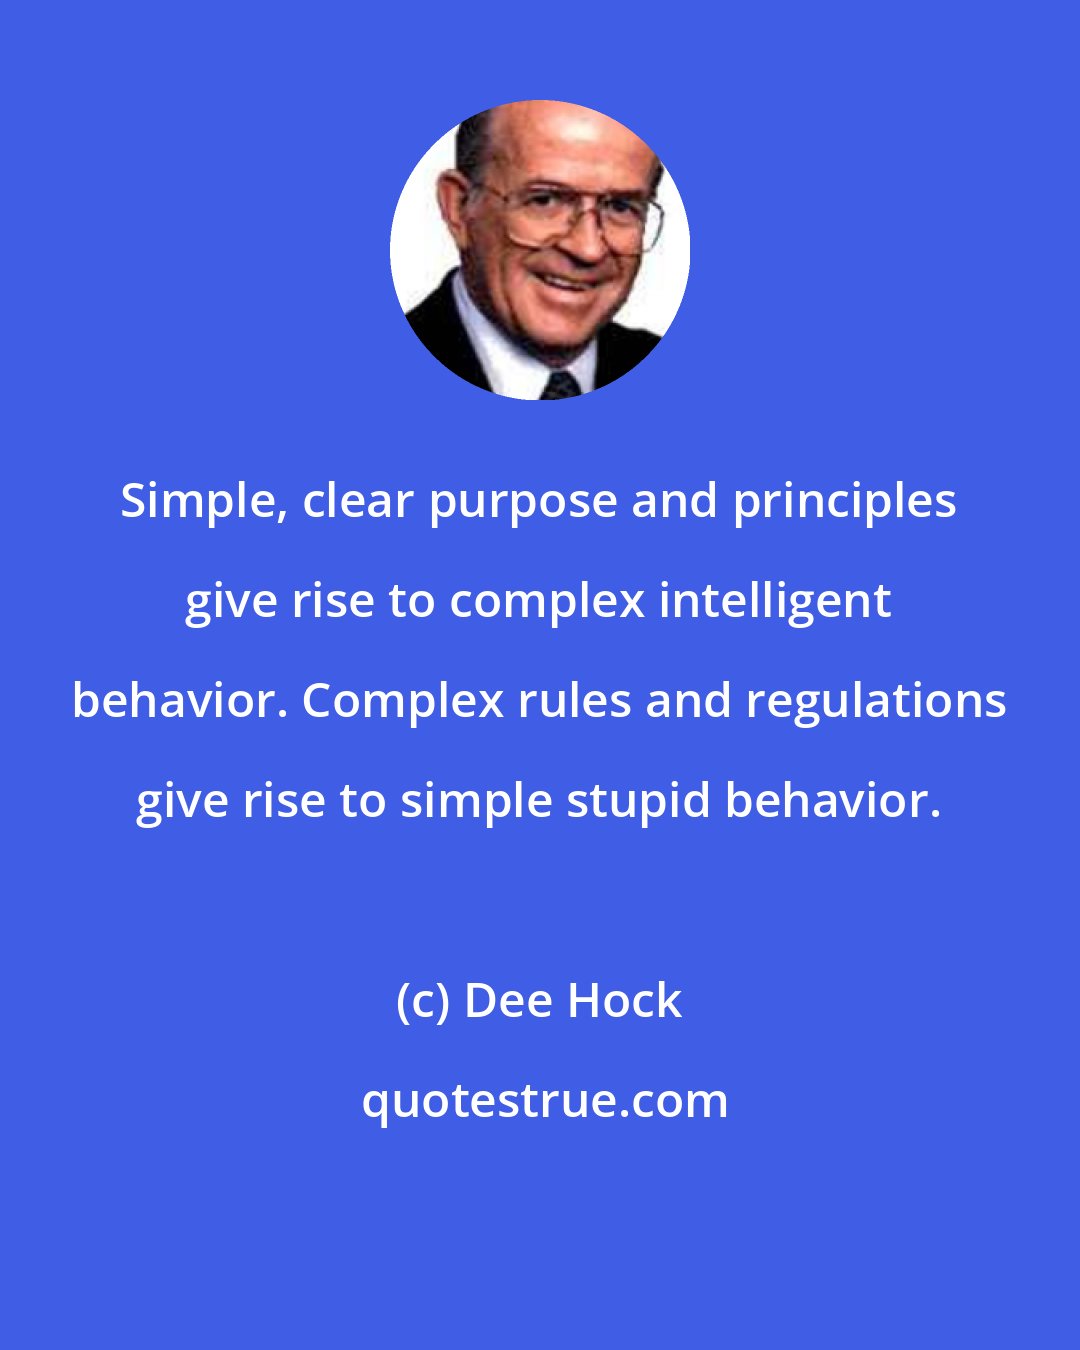 Dee Hock: Simple, clear purpose and principles give rise to complex intelligent behavior. Complex rules and regulations give rise to simple stupid behavior.